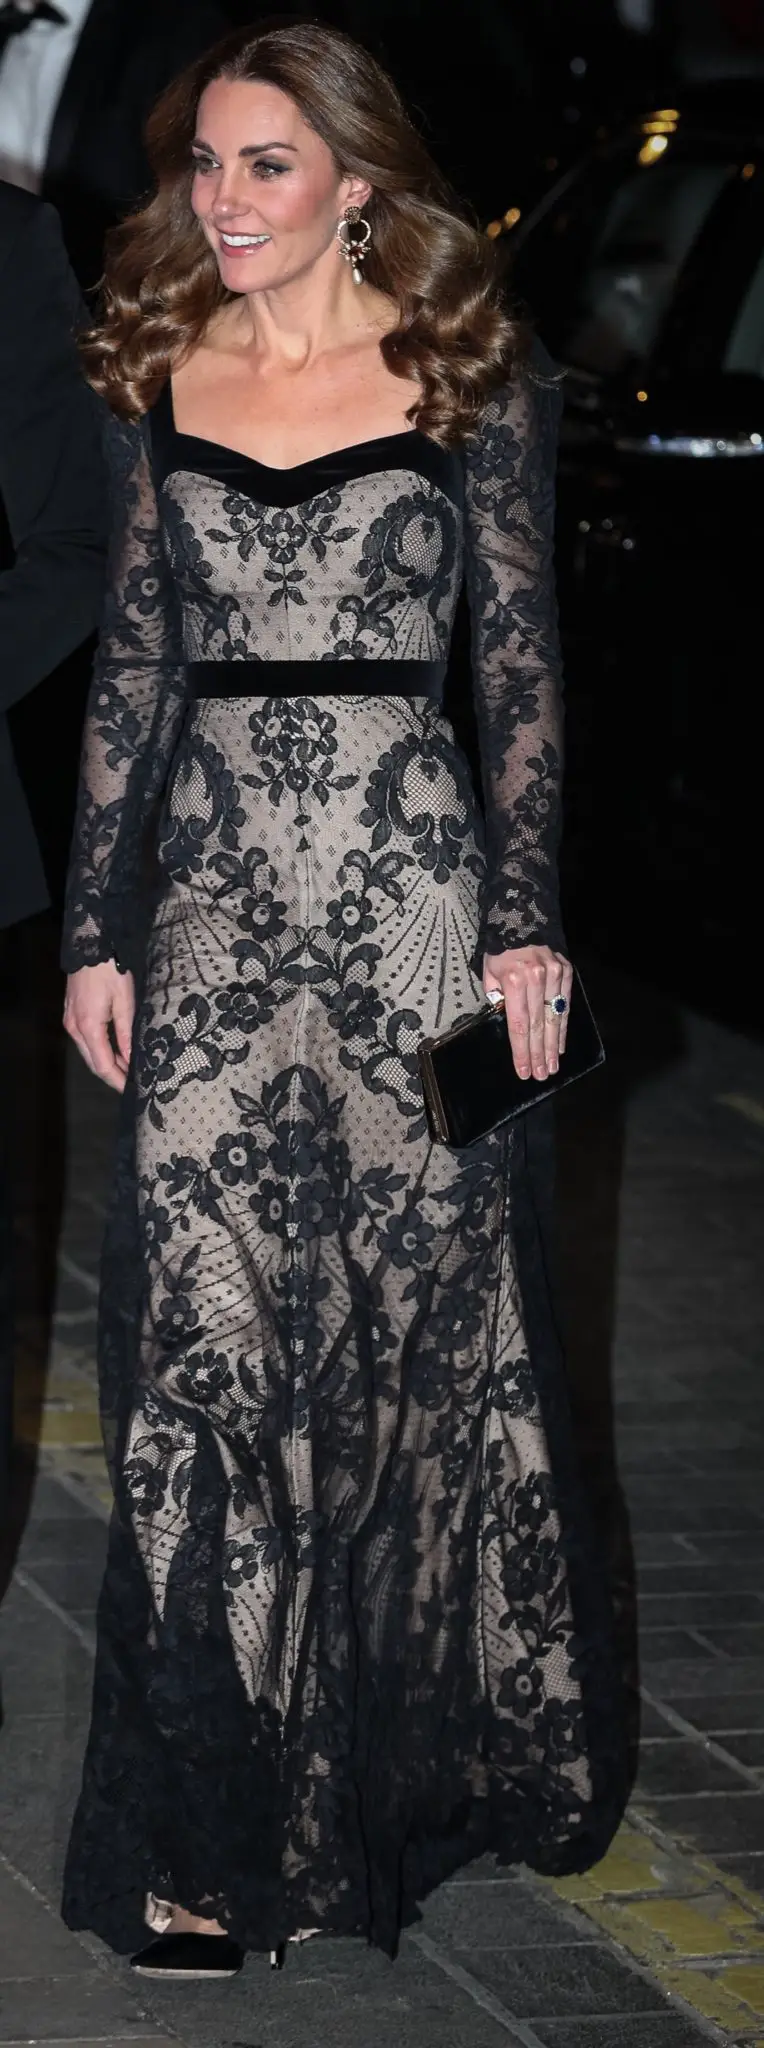 The Duchess of Cambridge wore black Alexander McQueen Lace gown with Erdem earrings and Jimmy Choo Pumps at Royal Variety Performance